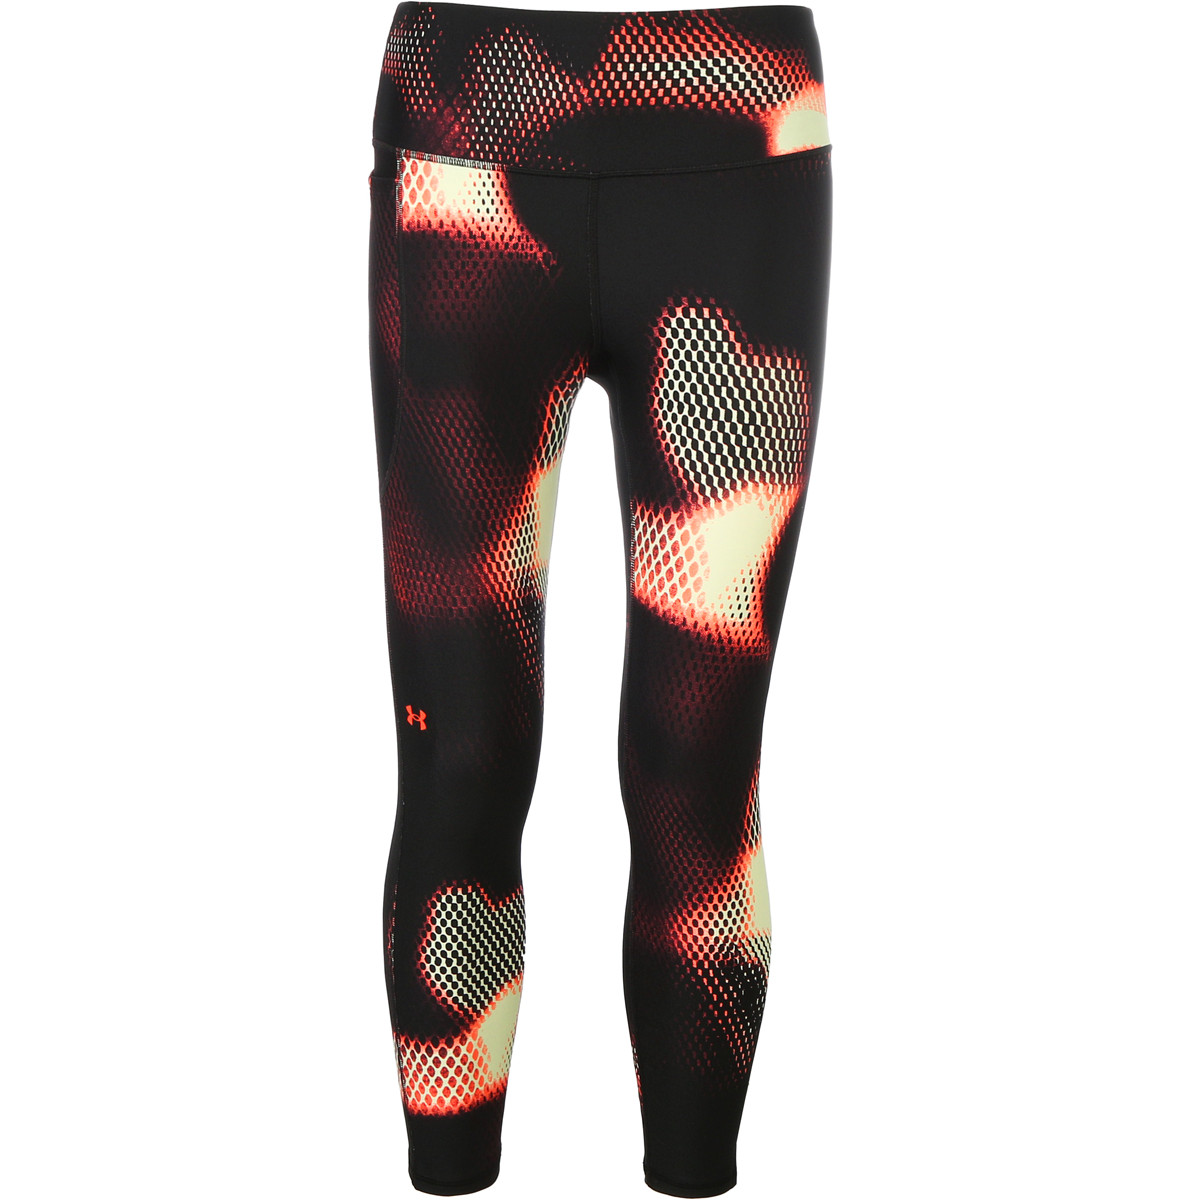 MALLAS UNDER ARMOUR MUJER ANKLE - UNDER ARMOUR - Mujer - Ropa